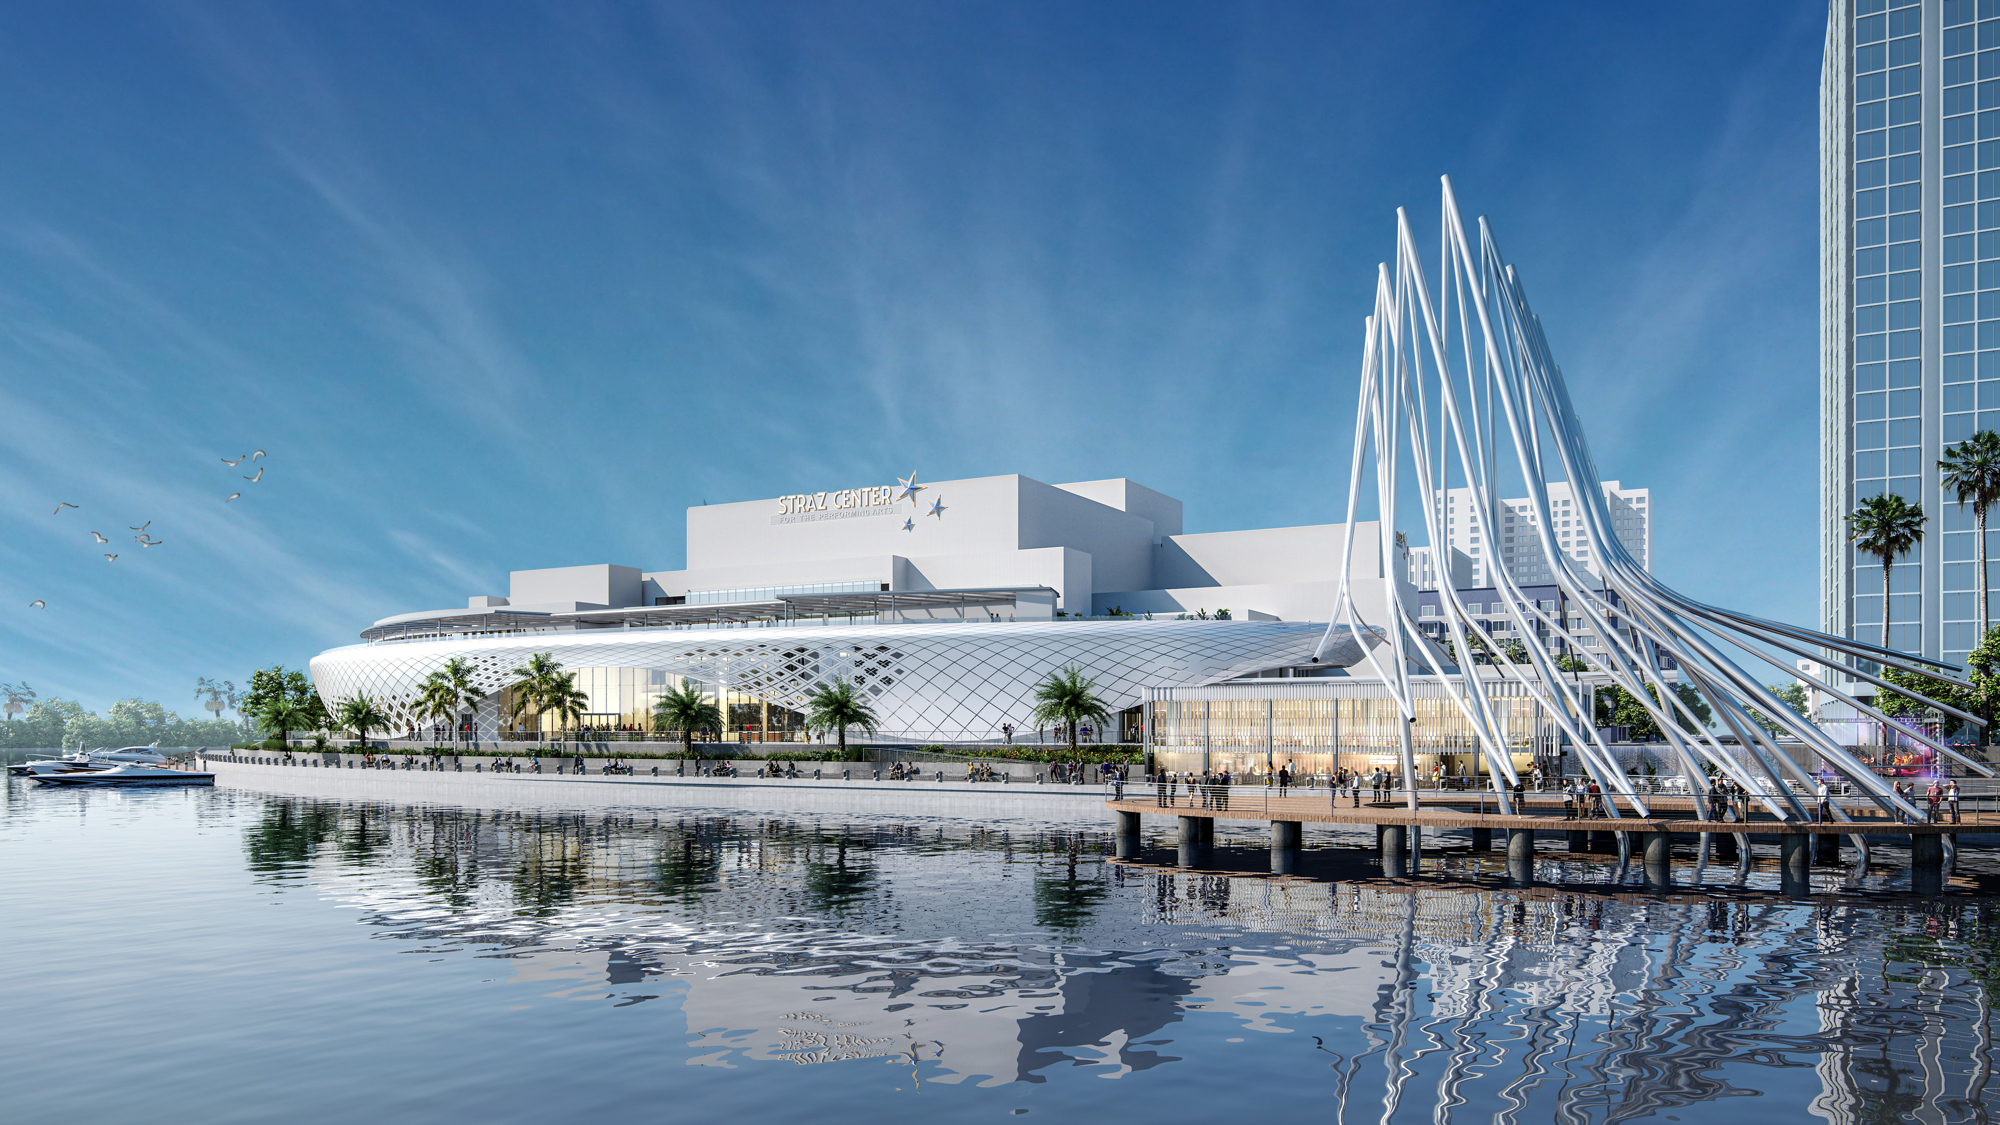 An artist's rendering of what Tampa's Straz Center for the Performing Arts will look like when it's fully expanded and renovated. (Courtesy photo)